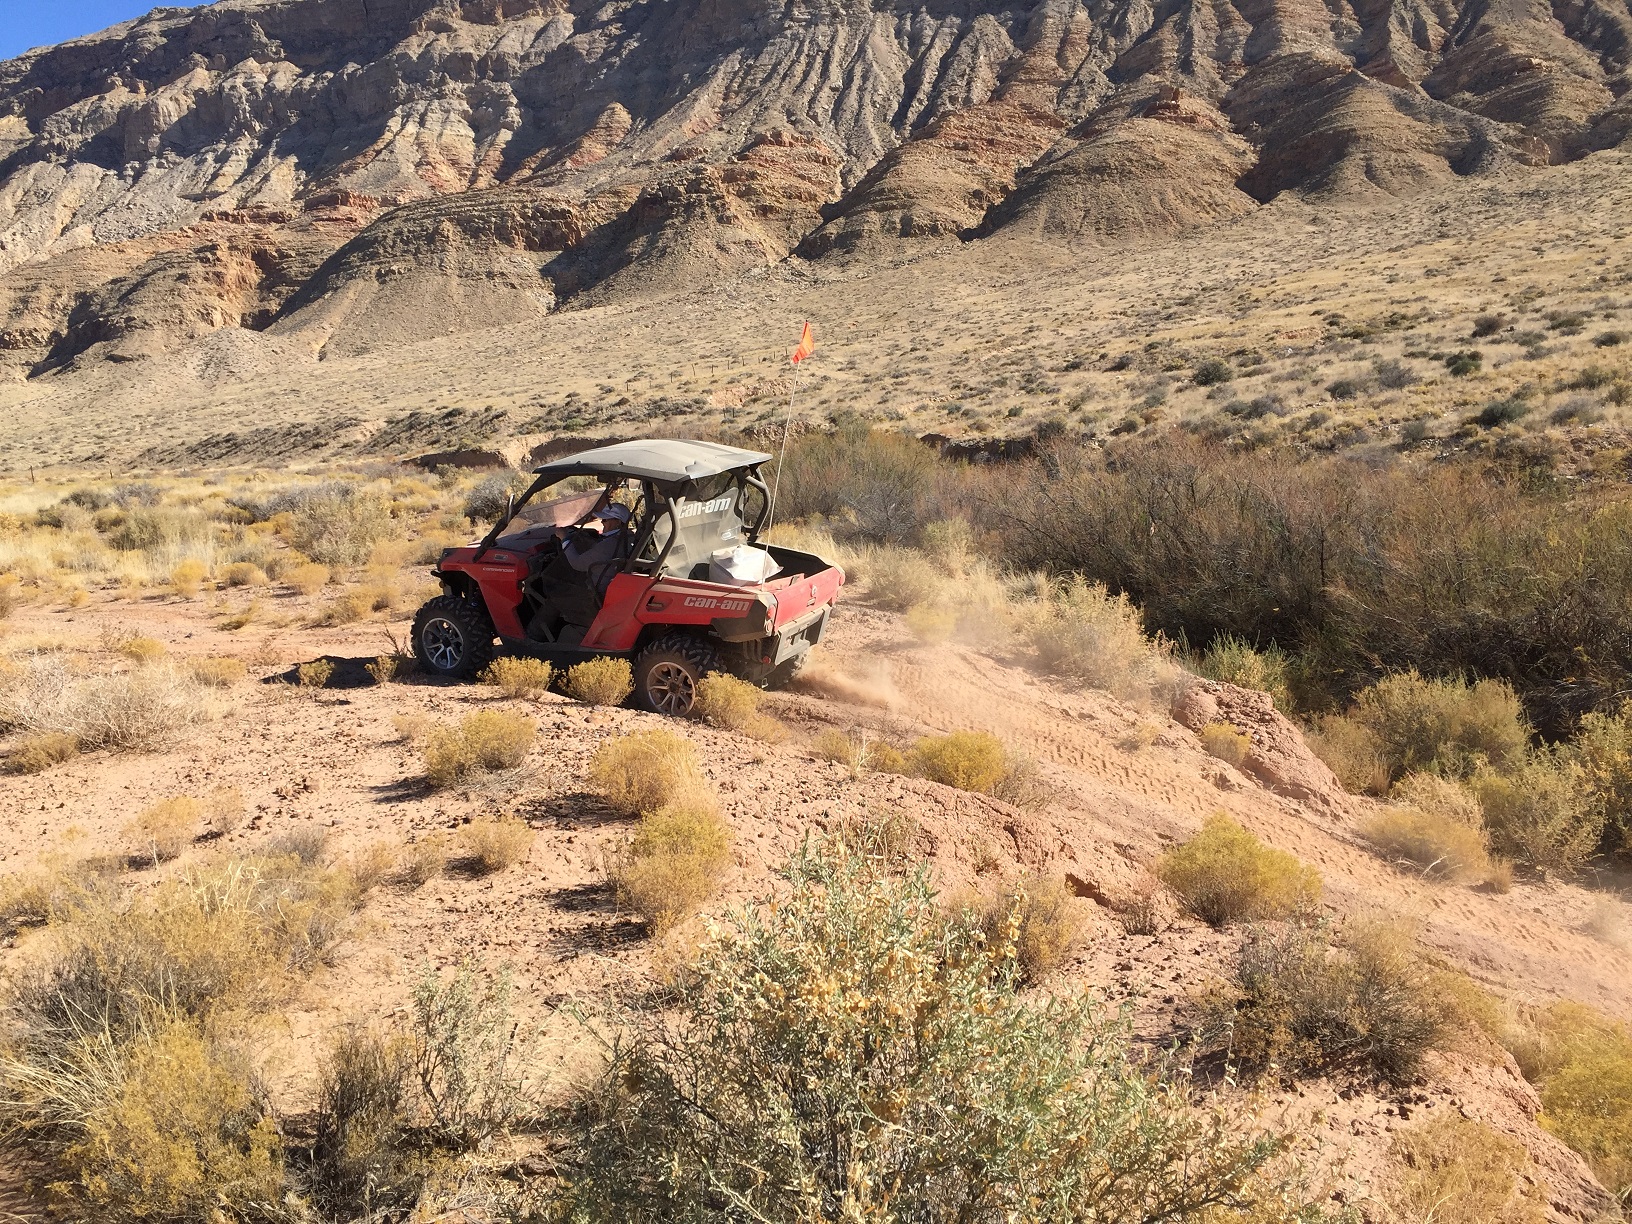 Paul & Bonnie Weaver's ATV on the Temple Trail where it crosses the Fort Pearce Wash